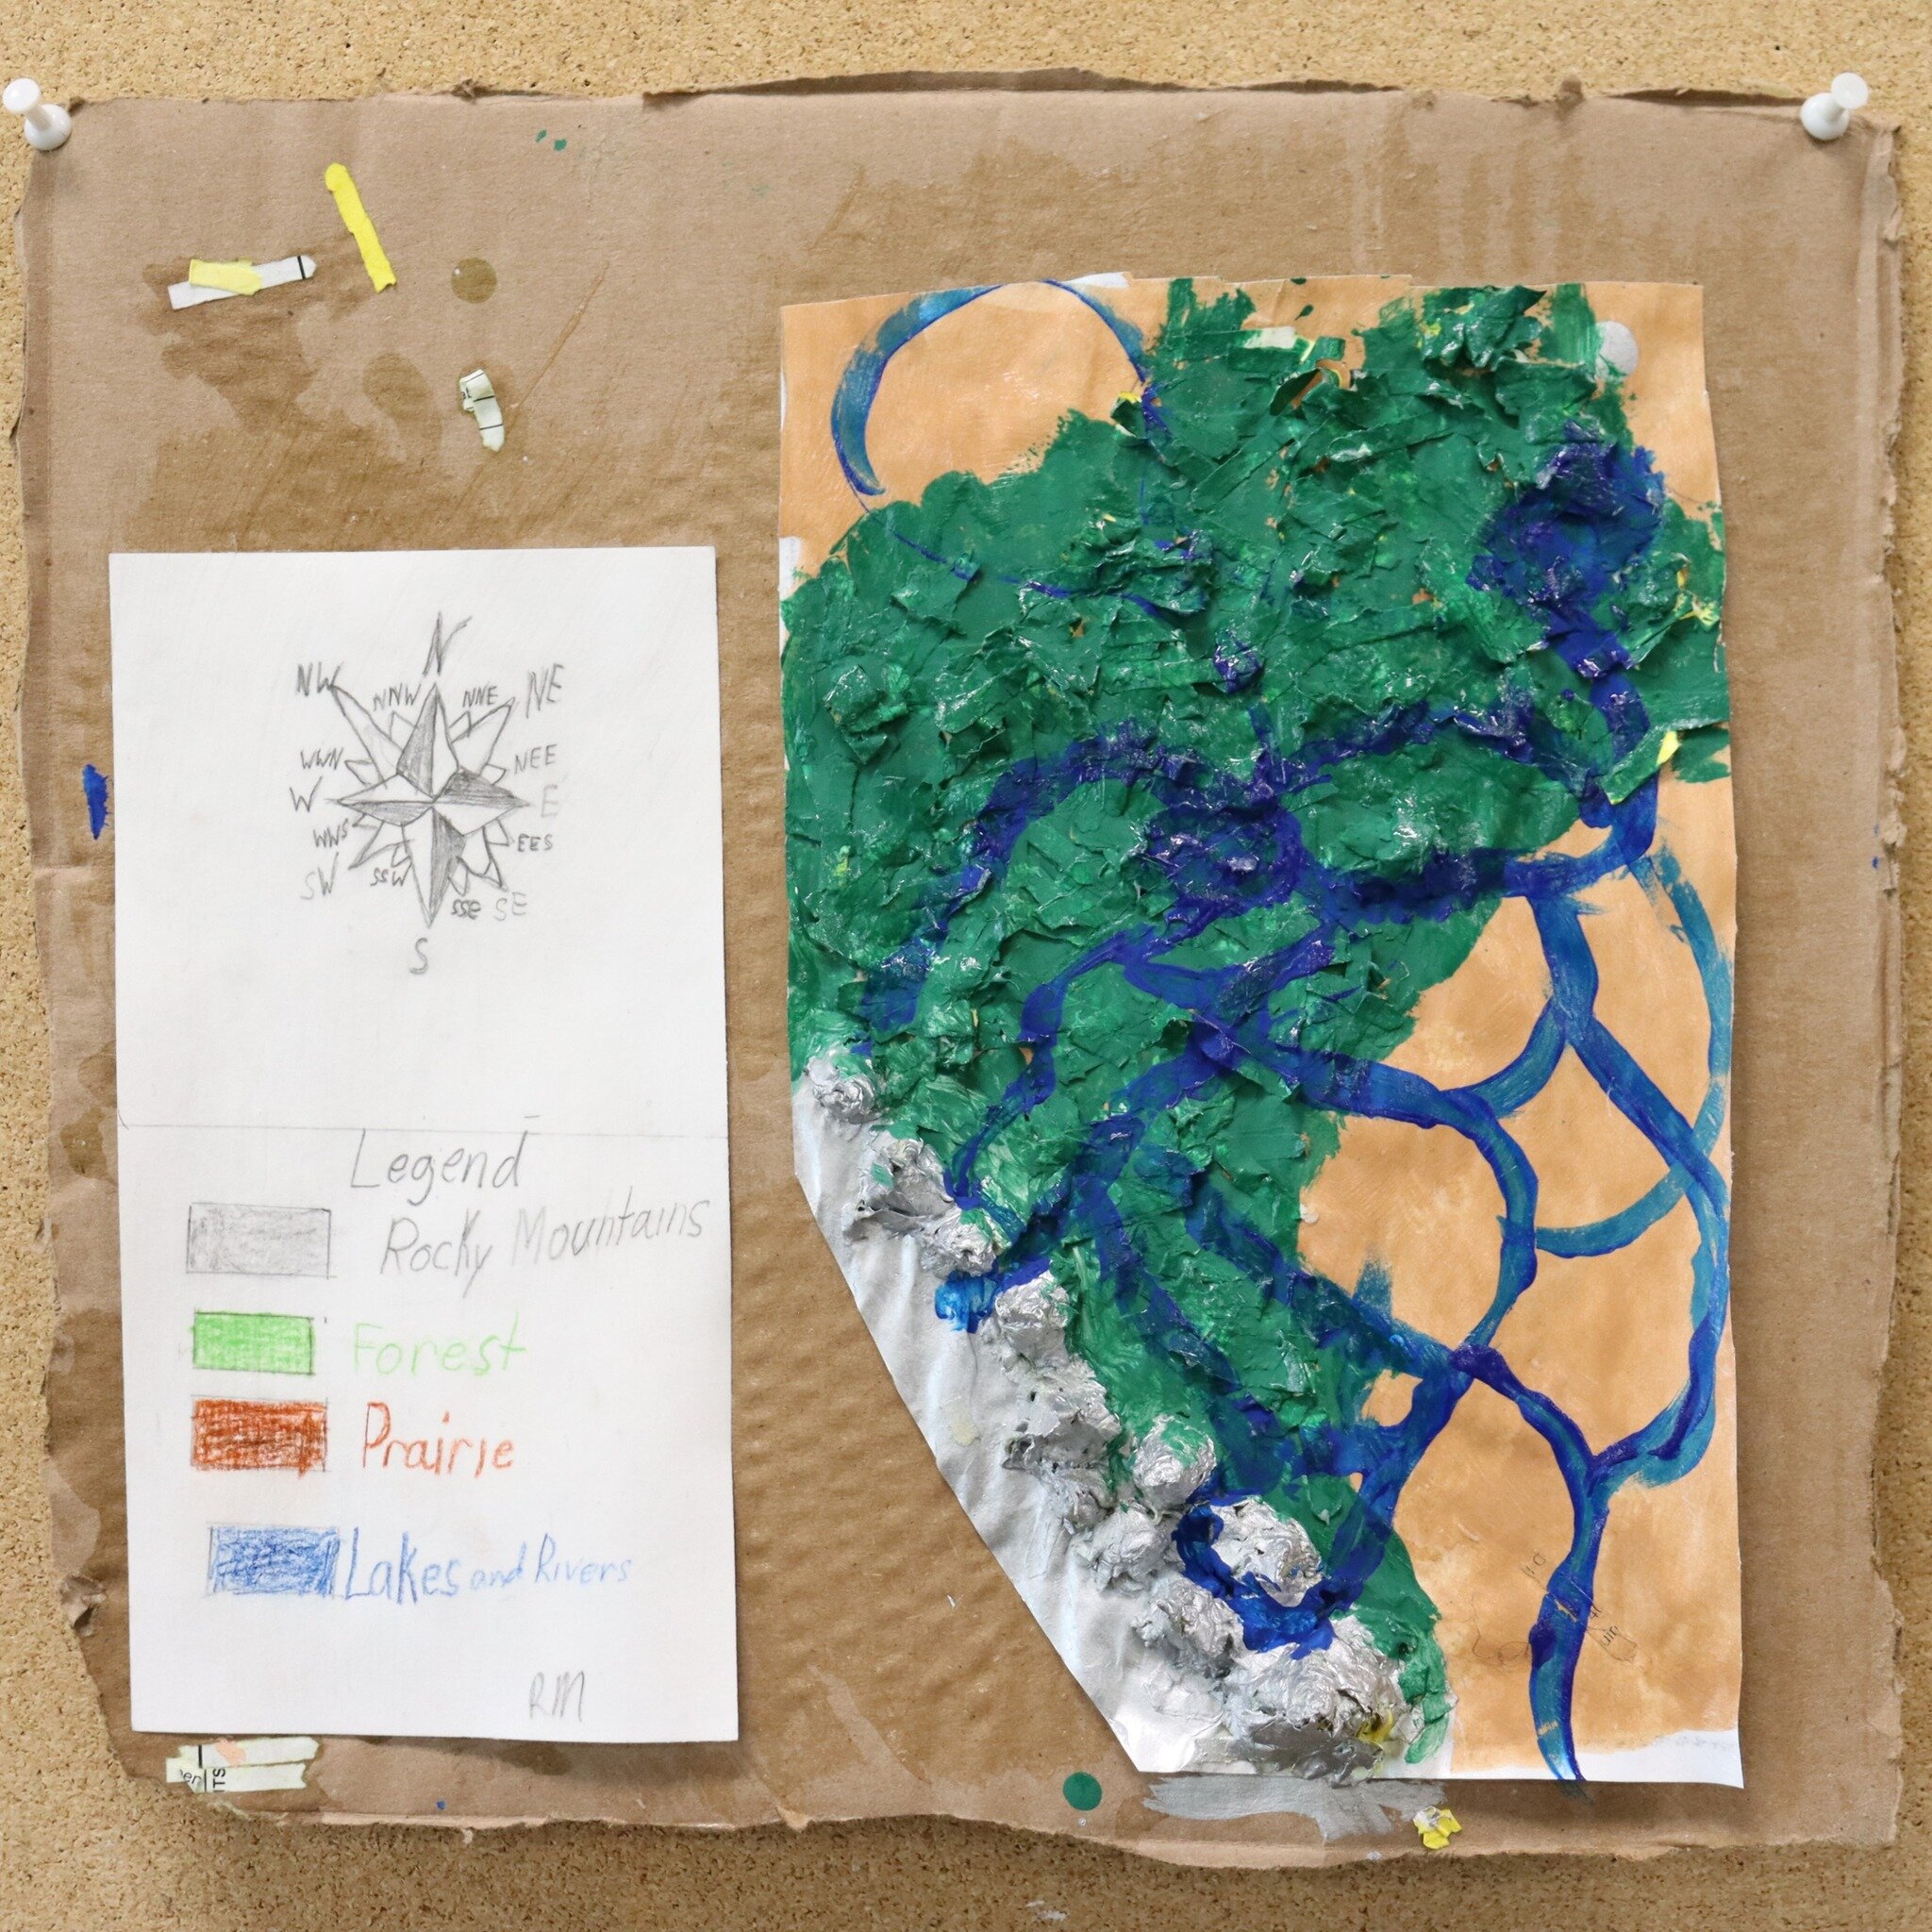 Alberta's diverse natural regions are being explored by Class 4. Using recycled mixed media, students crafted topographic maps with compass roses and legends, honing their geography skills.

#waldorfeducation #waldorfschool #alberta #canada #yycmaker